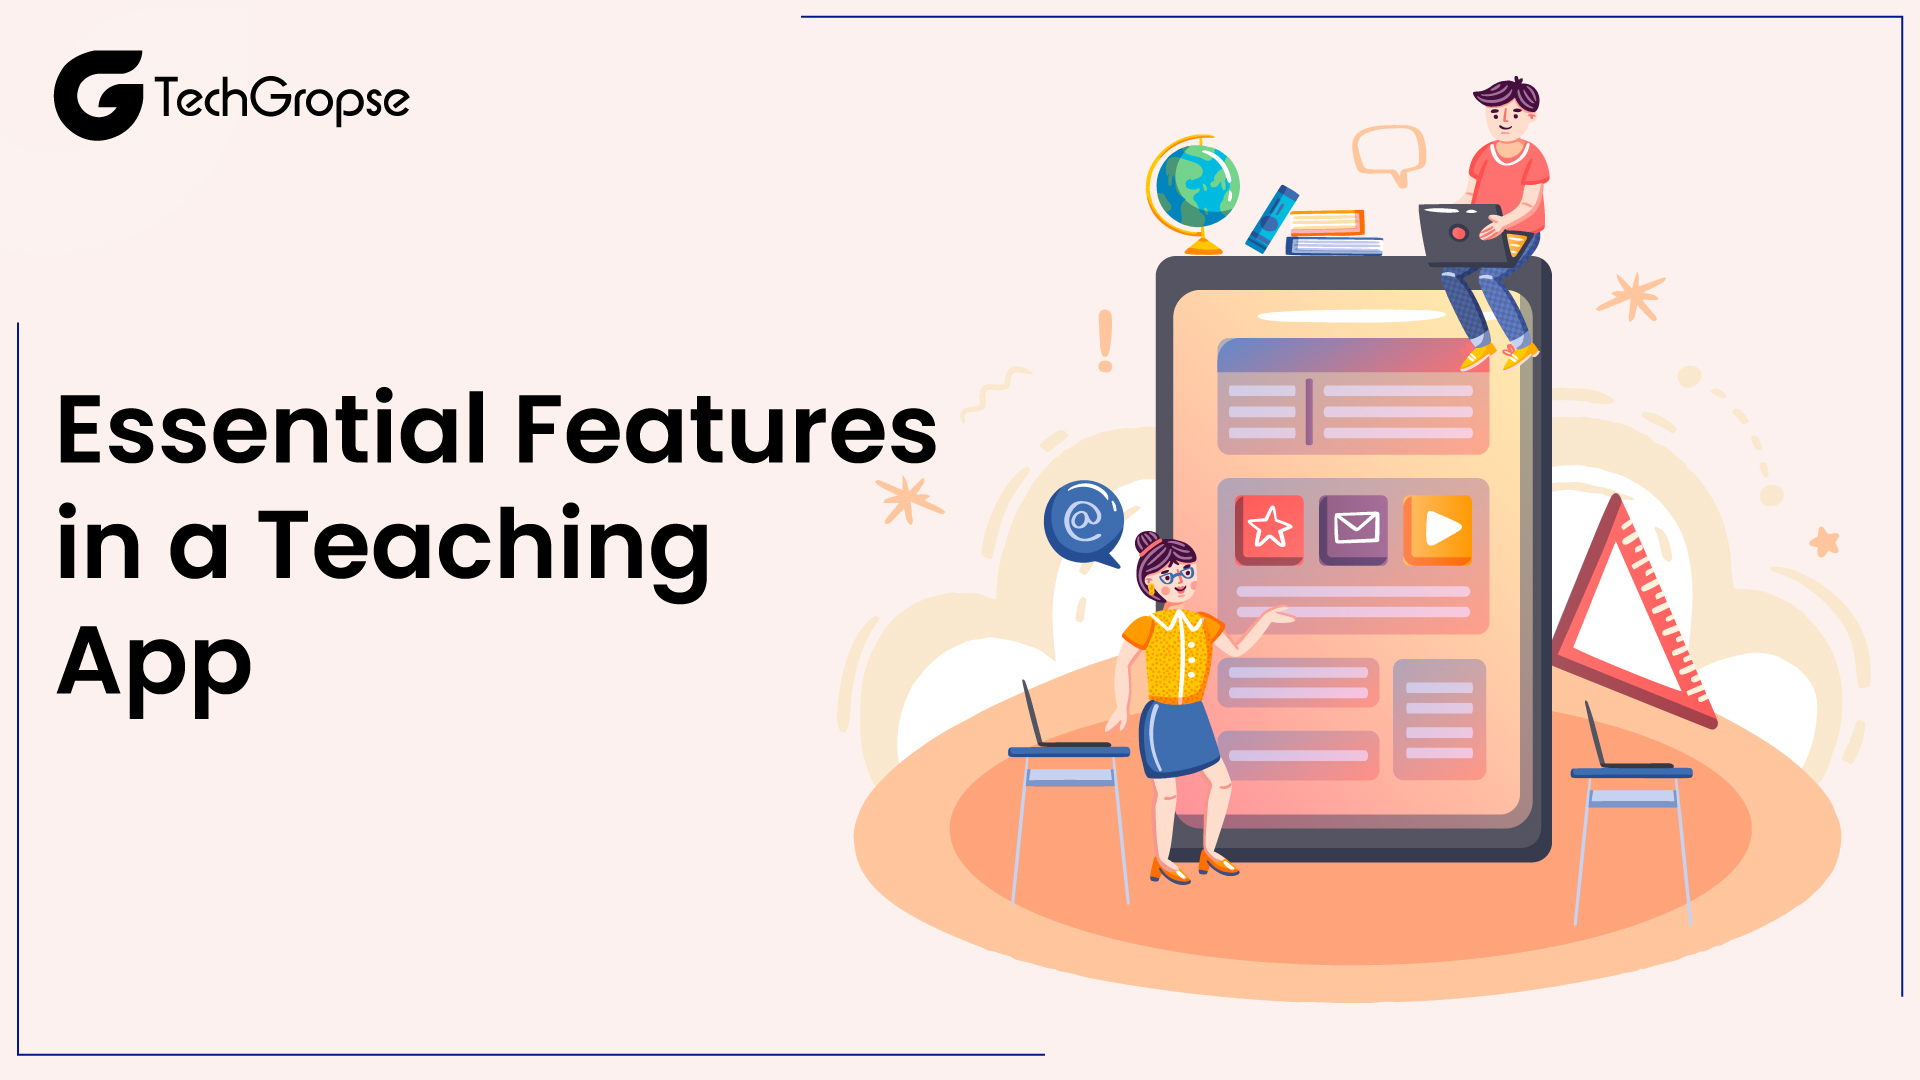 Features a Teaching App Must Have